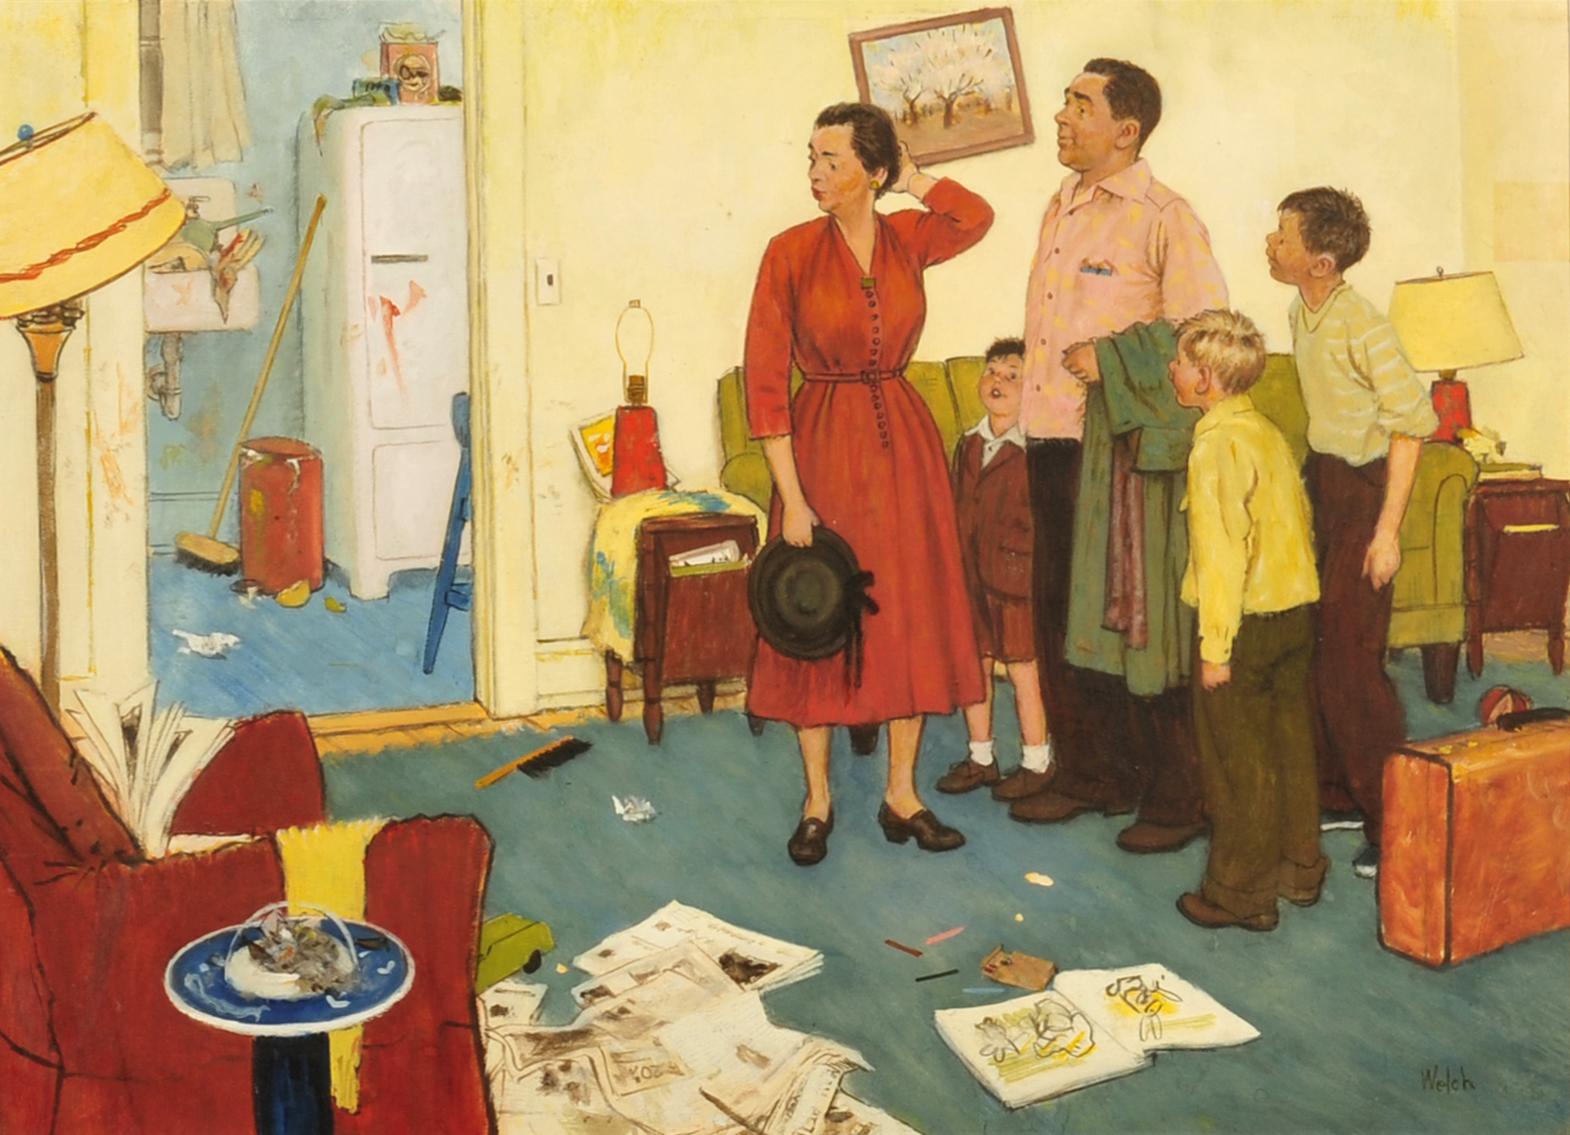 Woman Returns to an Untidy Home - Painting by Jack Welch